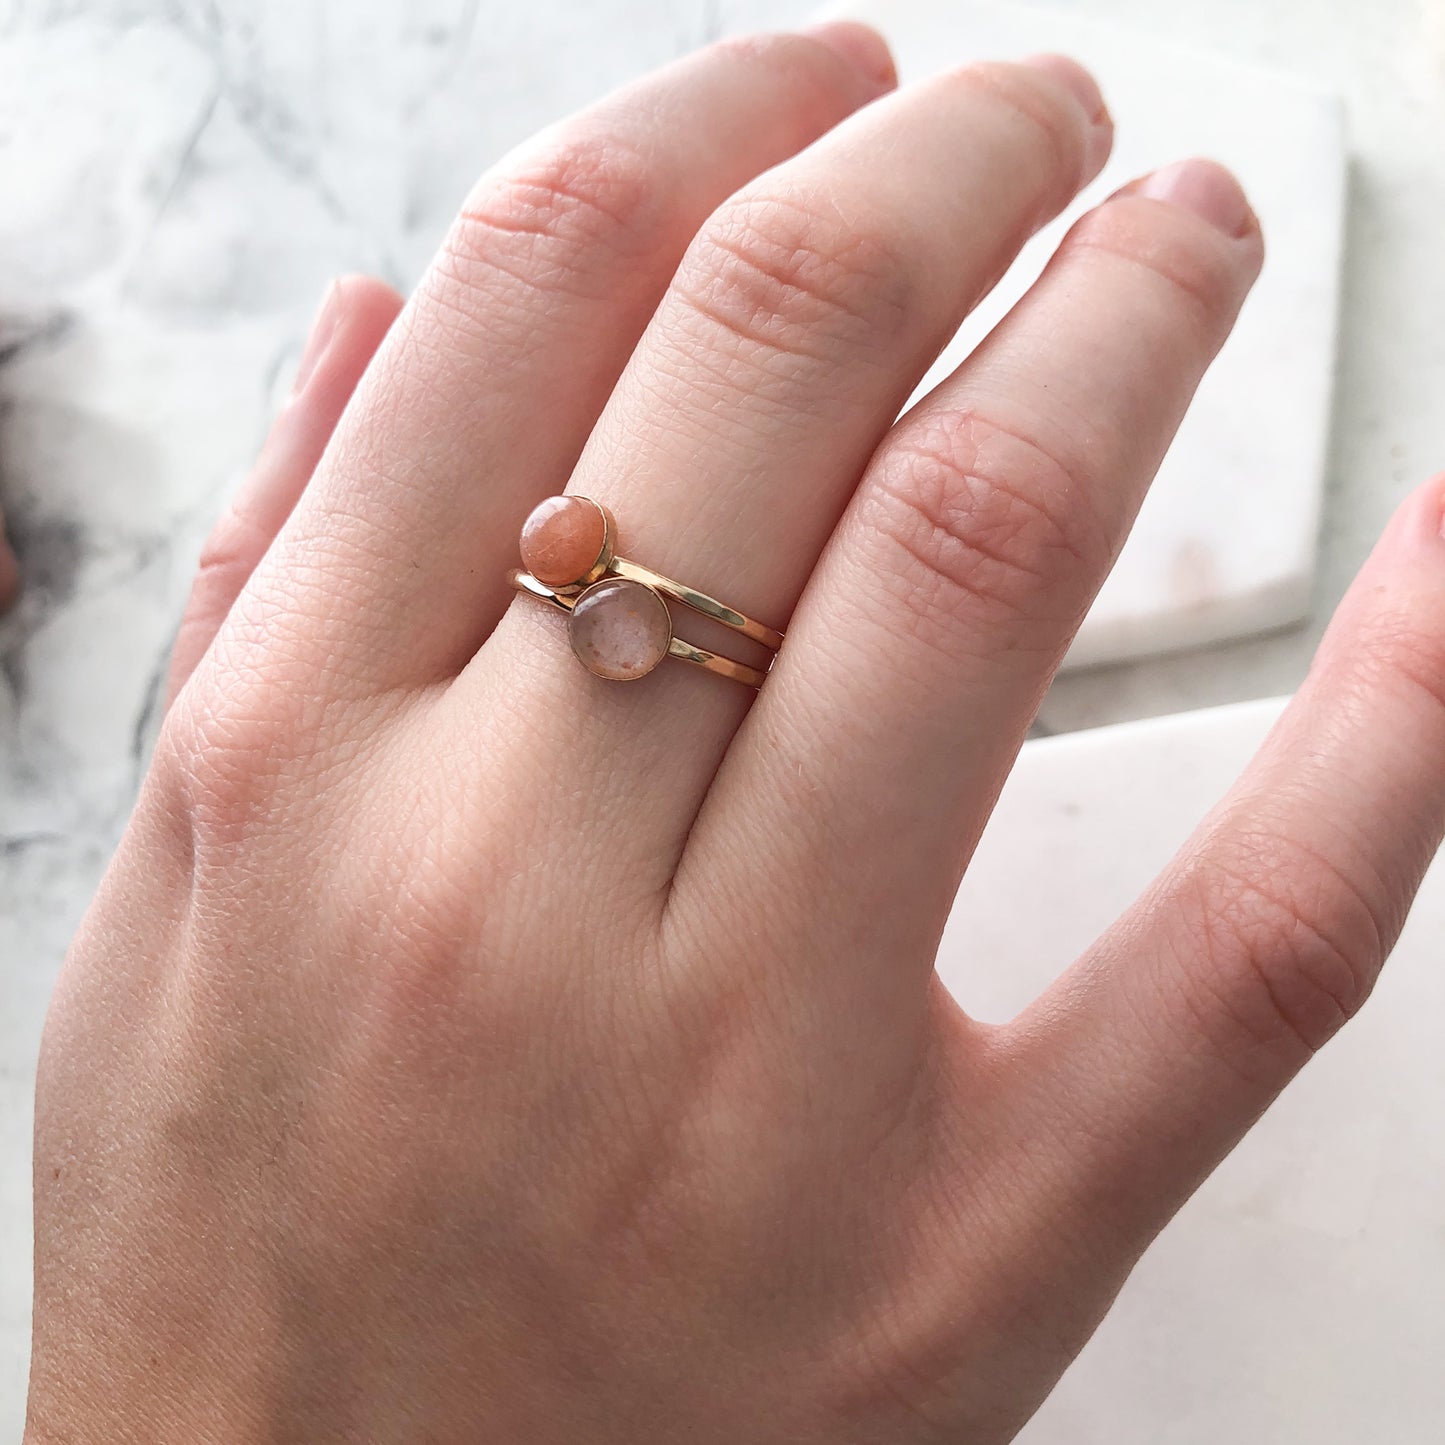 Peach Moonstone Stacking Ring - 14k gold-fill